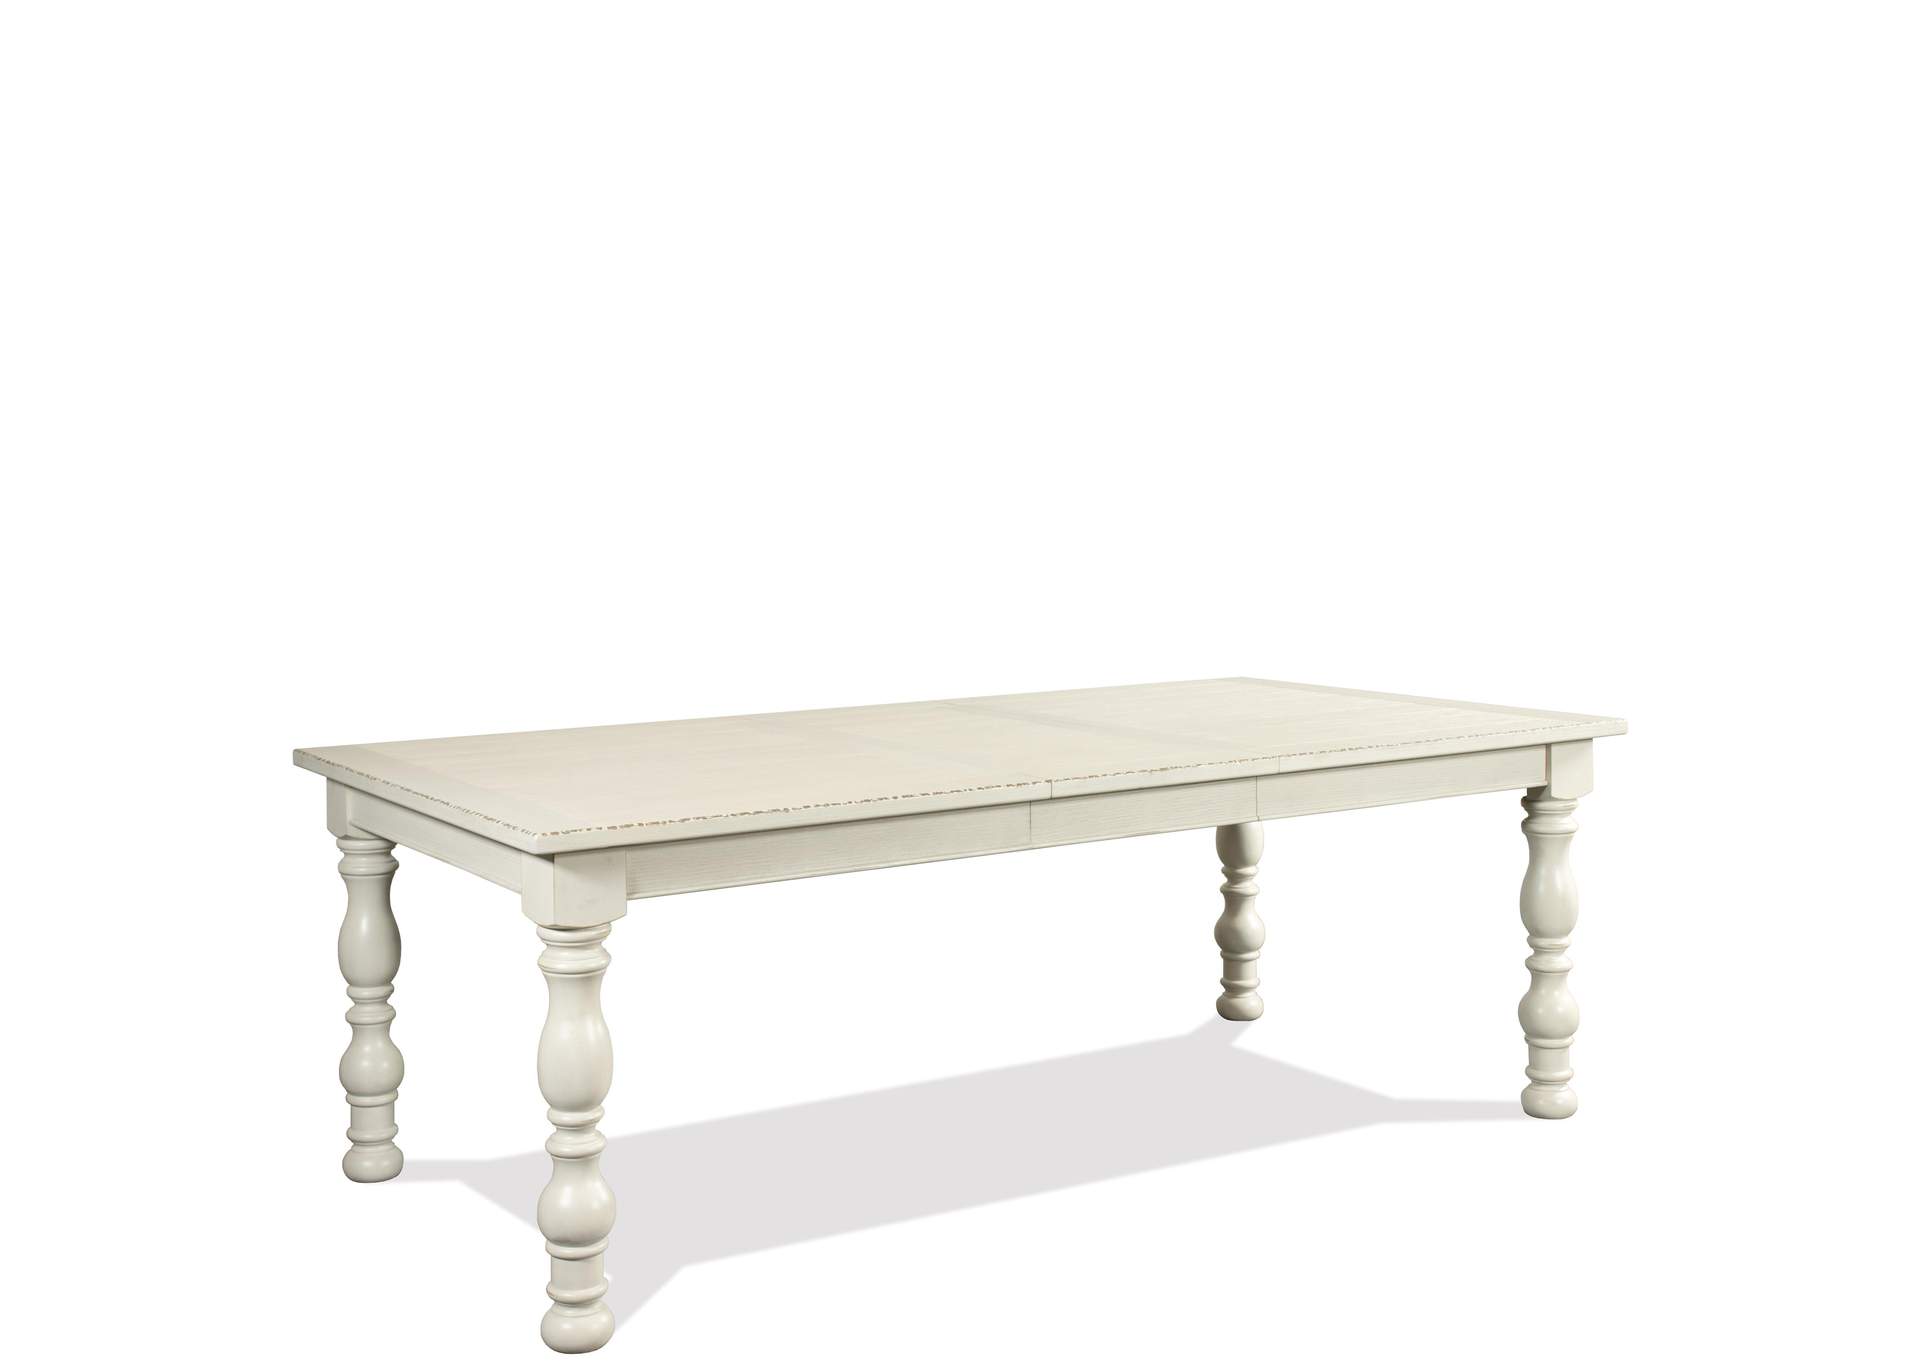 Aberdeen Weathered Worn White Rectangle Dining Table w/1 18" Leaf,Riverside